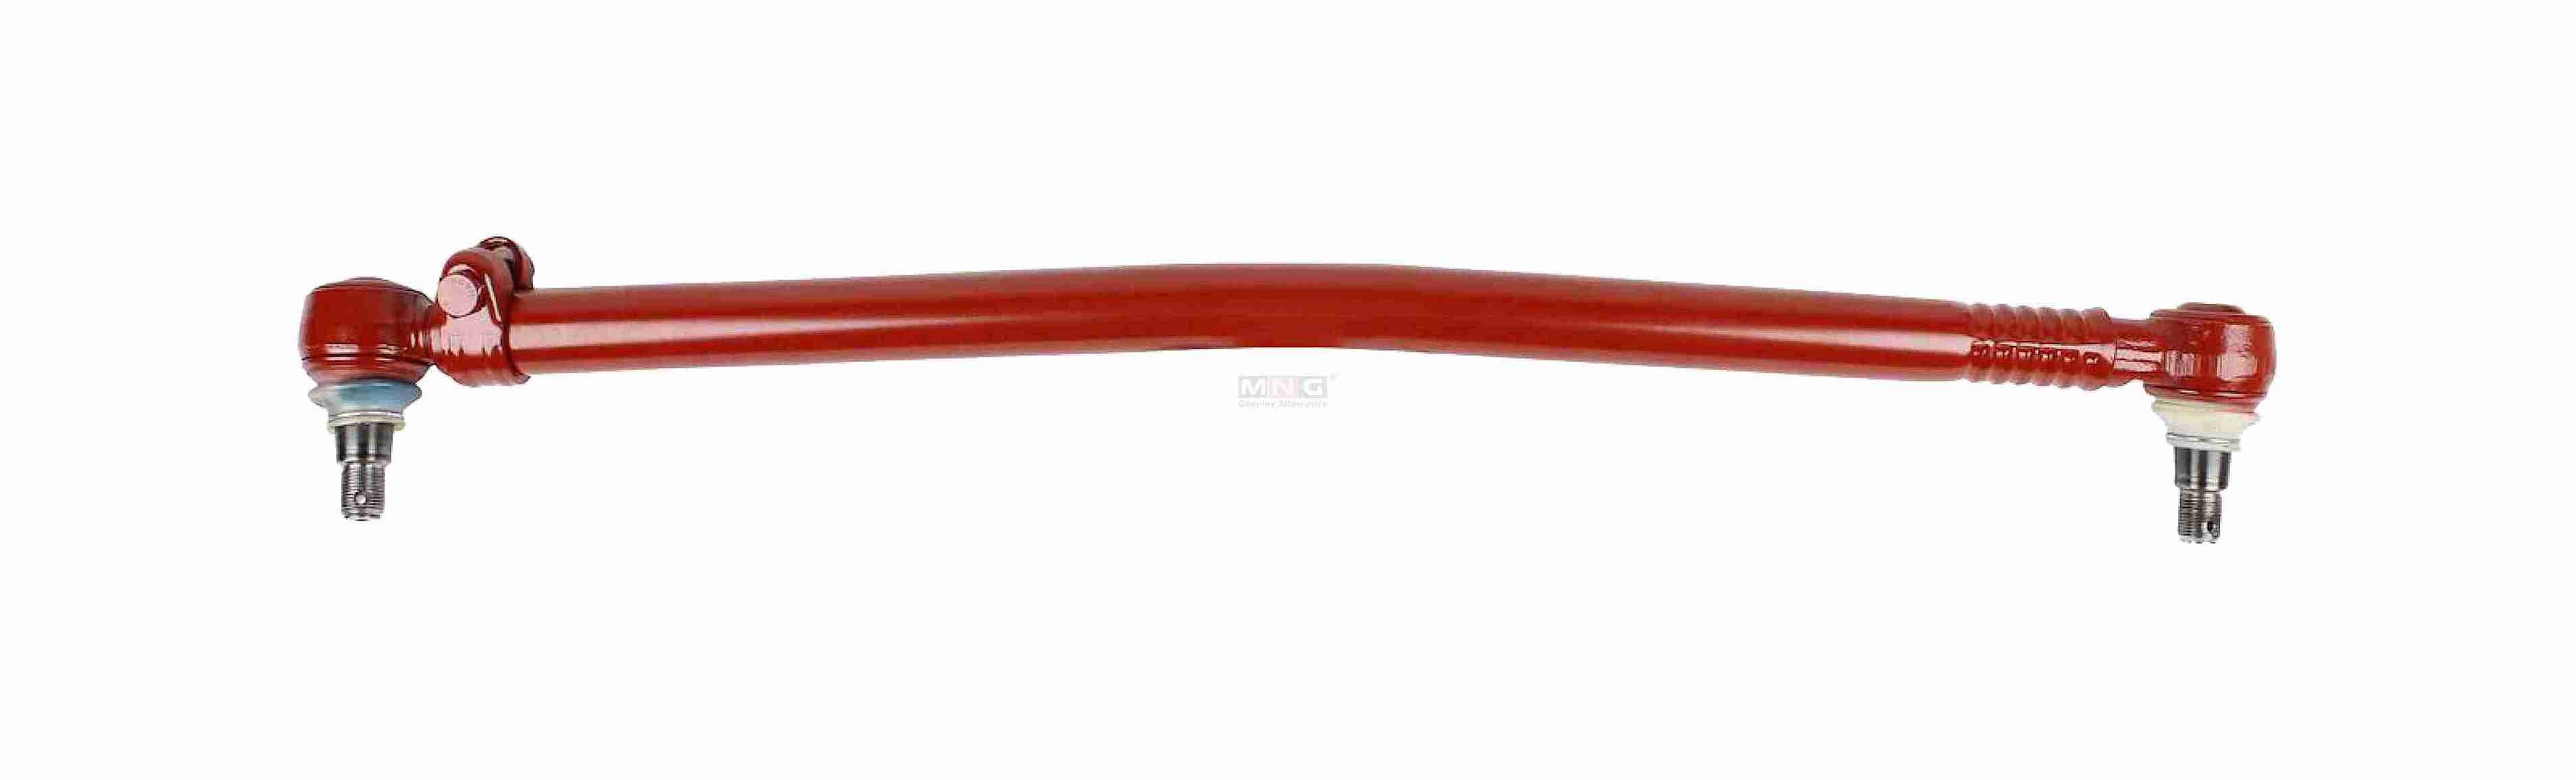 98402544-MNG-DRAG-LINK-IVECO